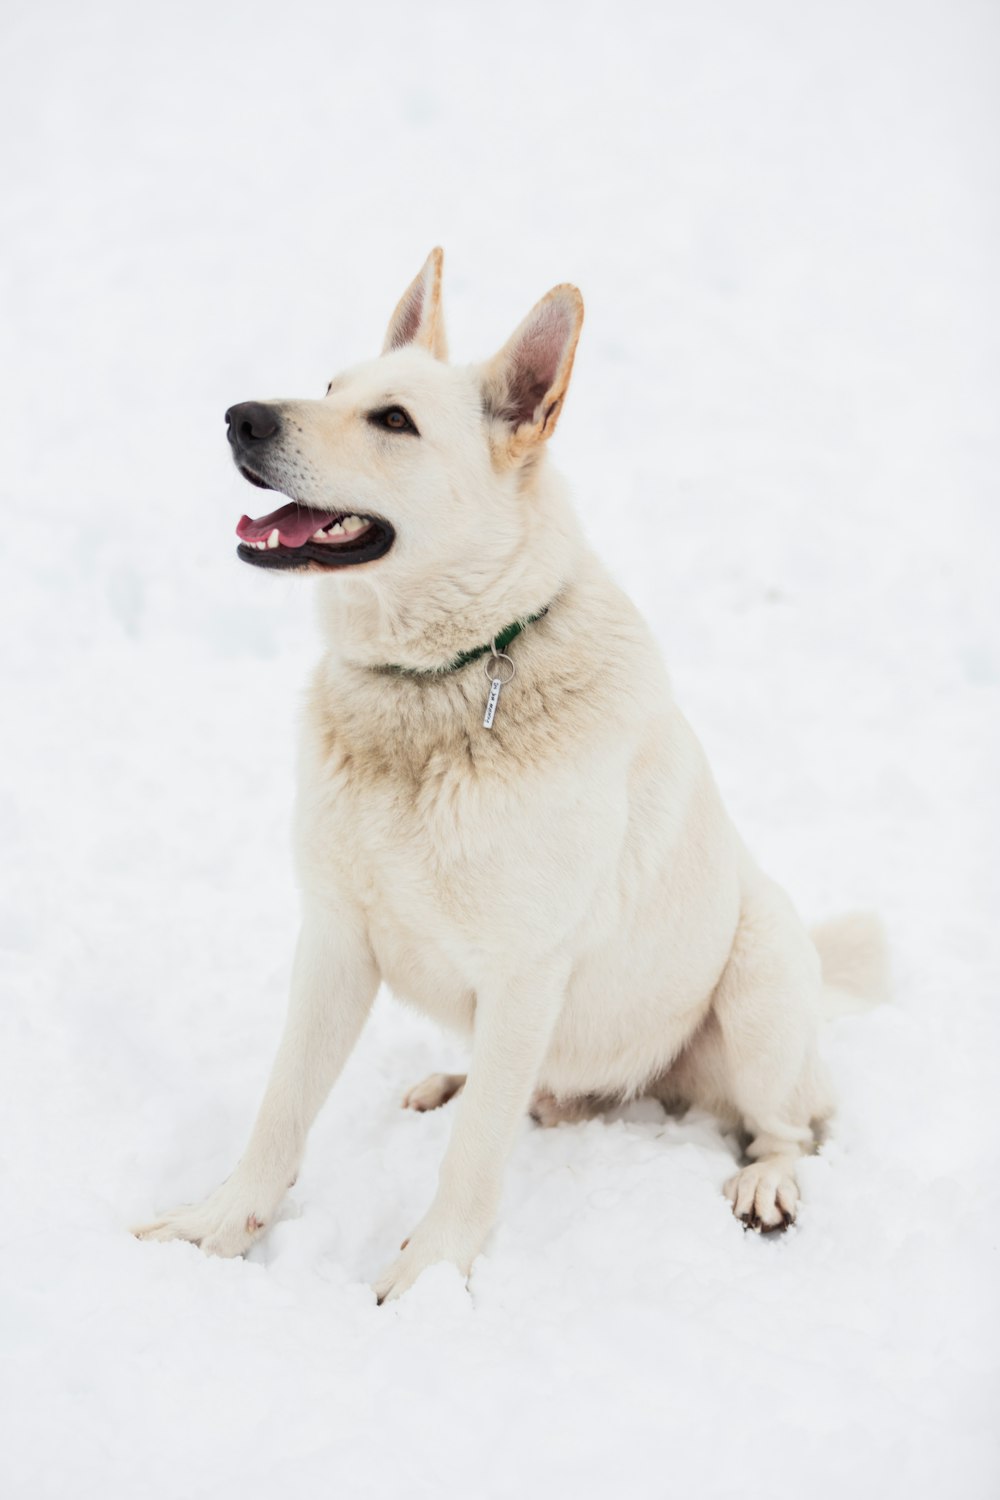 white and brown short coated dog on snow covered ground